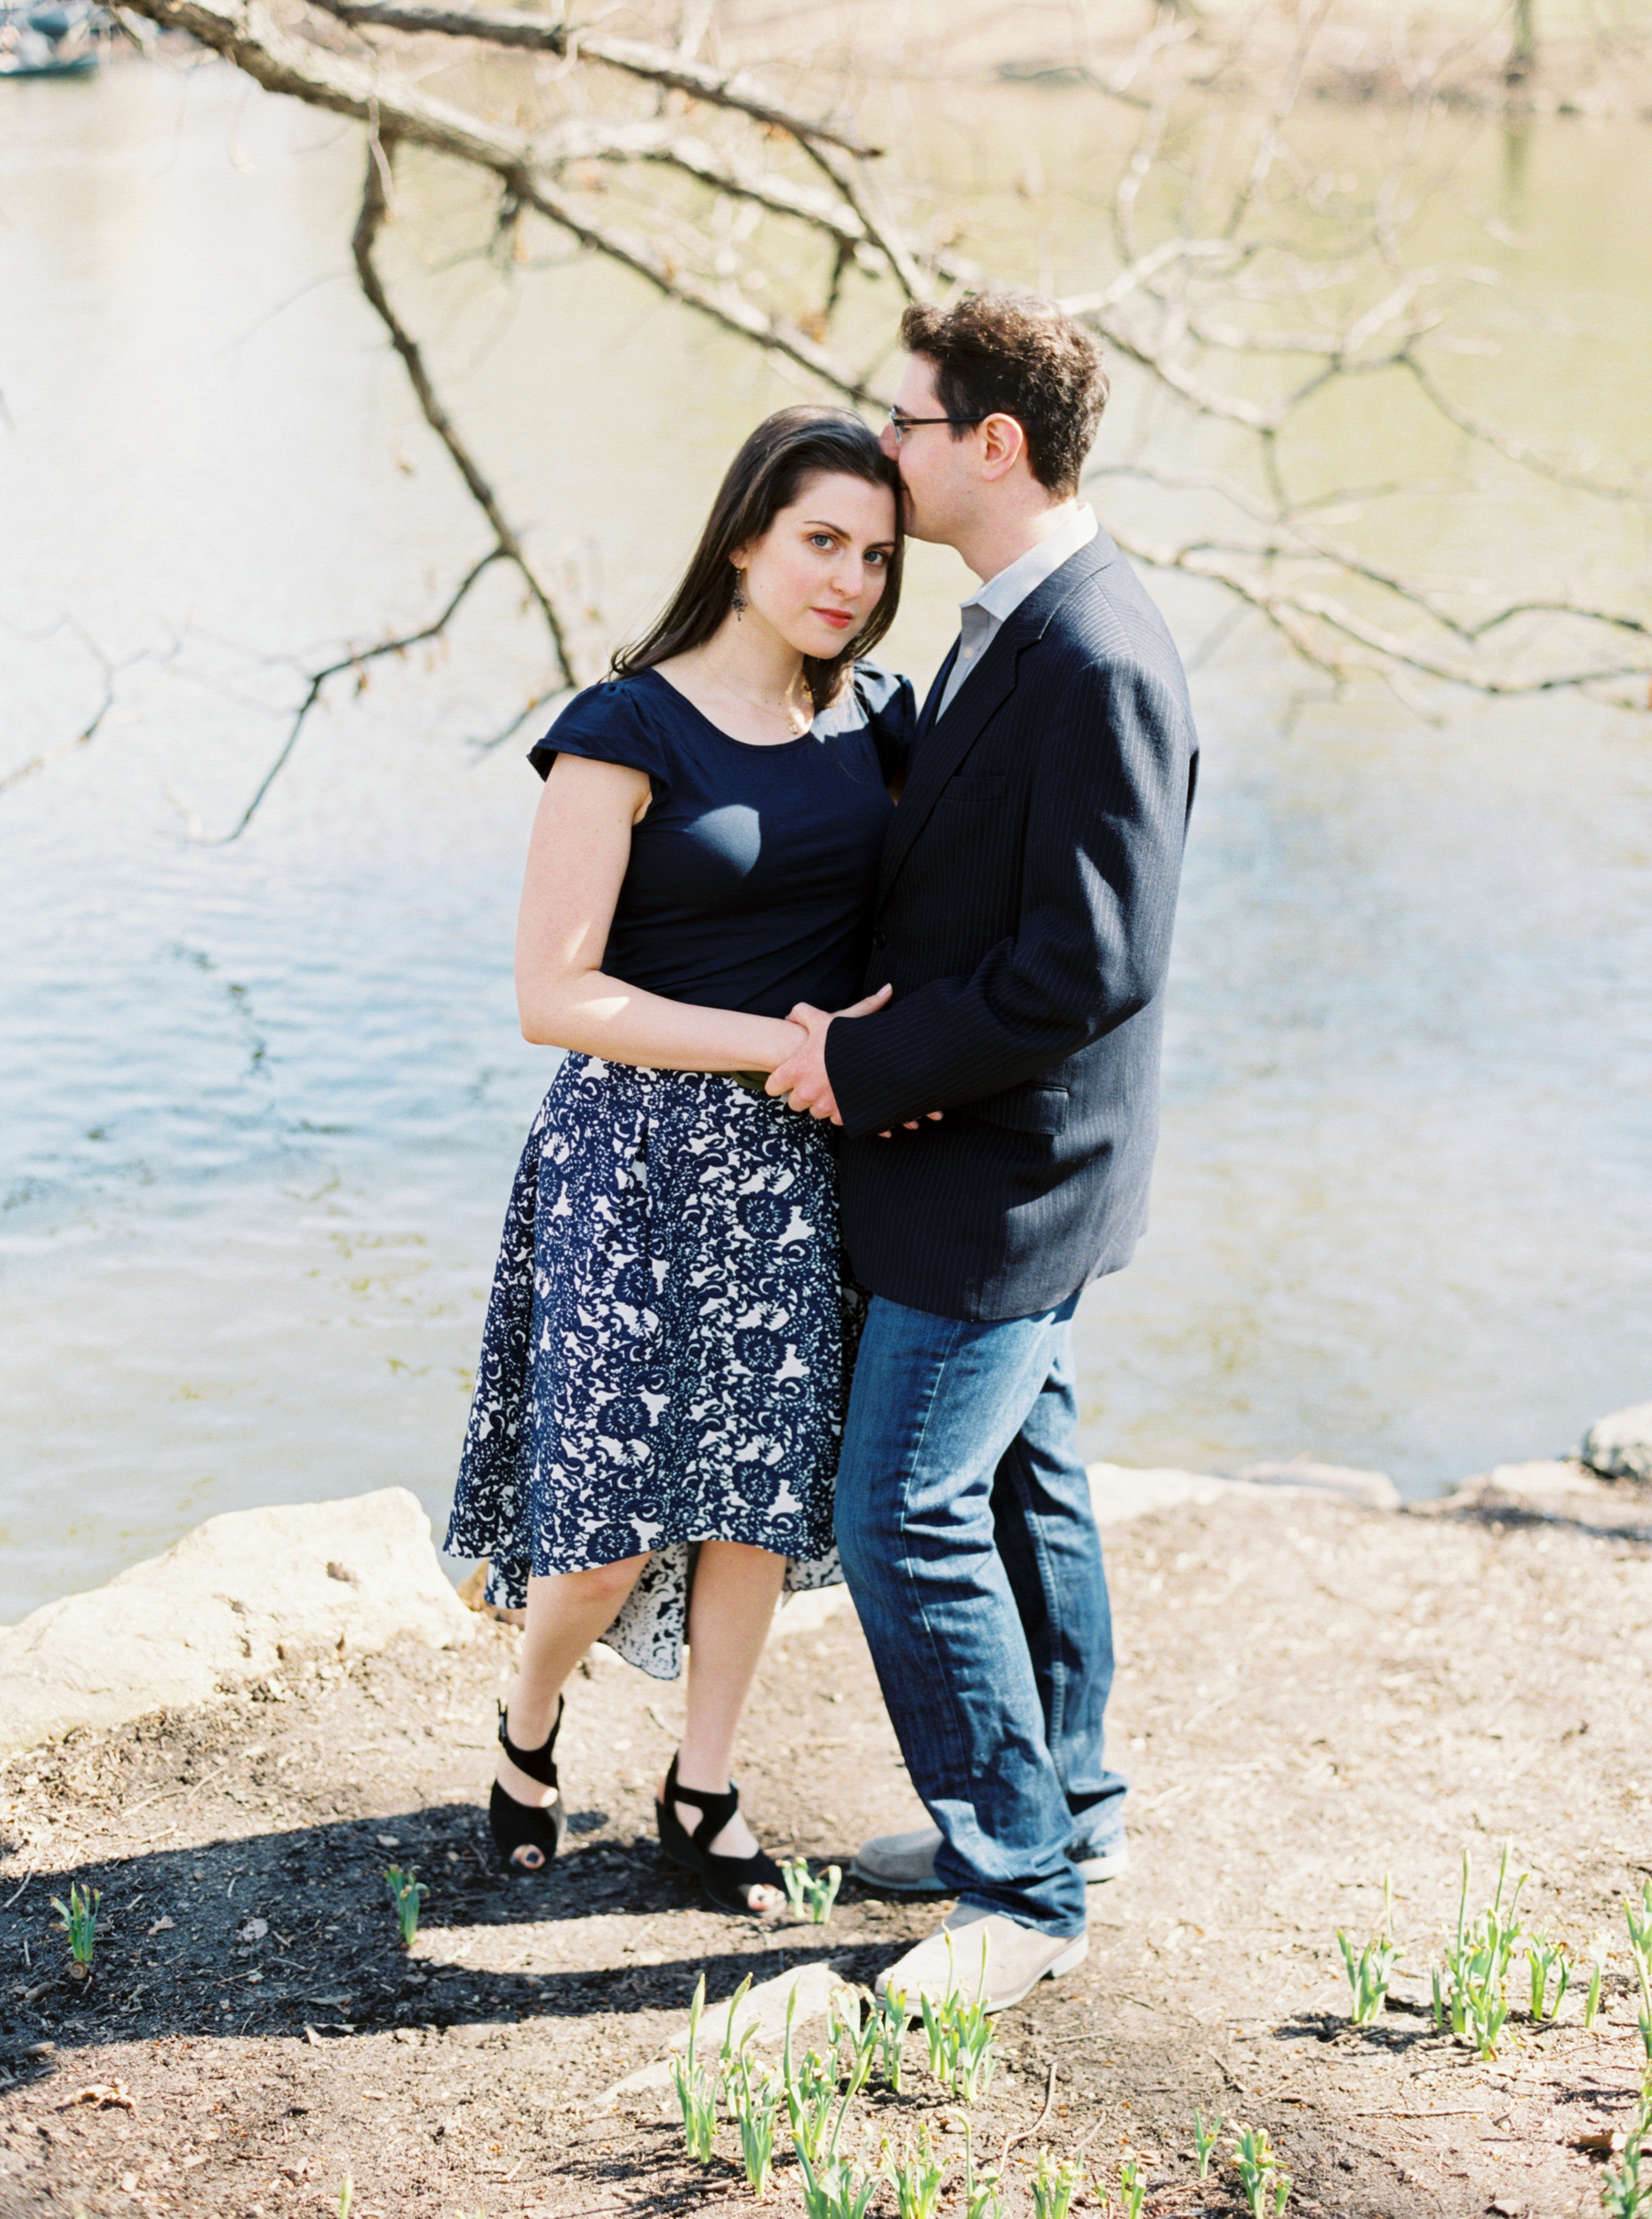 Central Park NY Engagement Session photography.